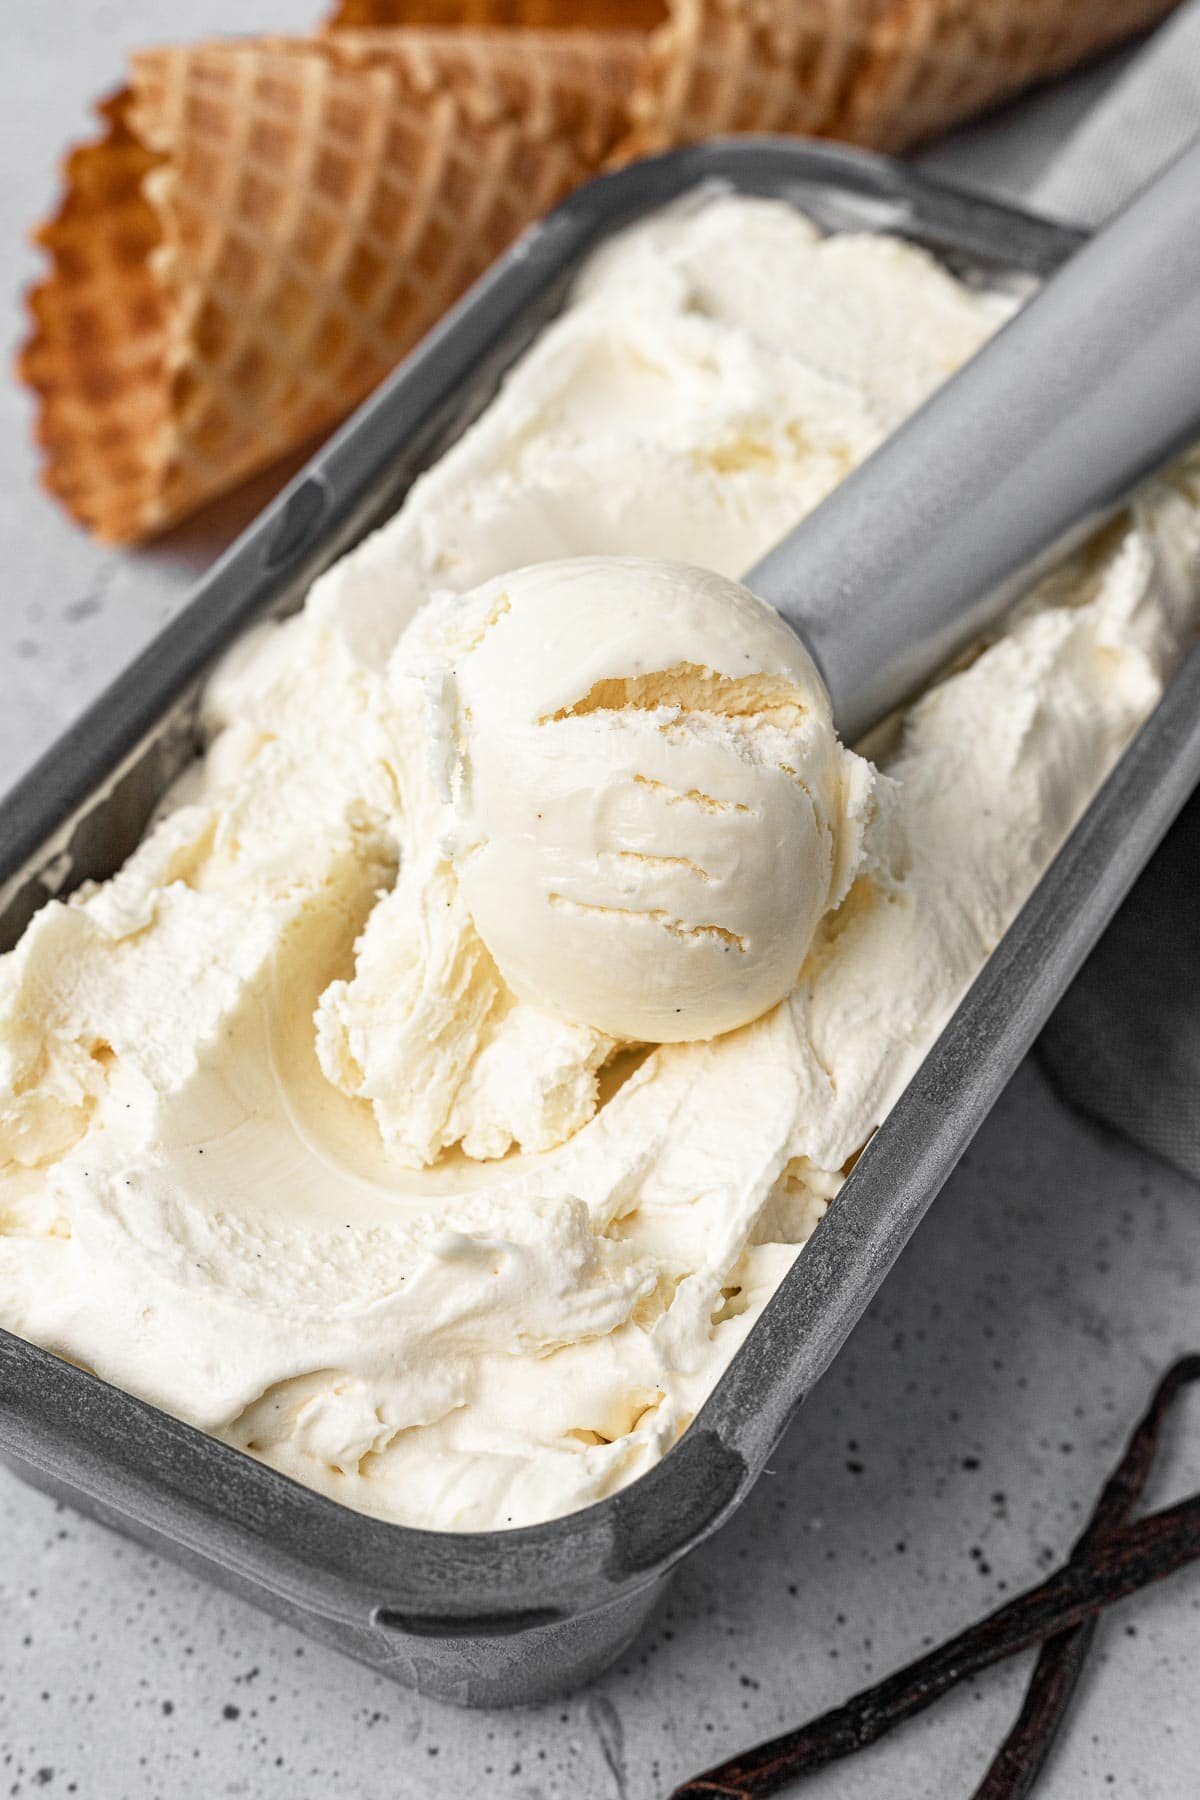 French Vanilla Ice Cream finished, scooping ice cream out of top